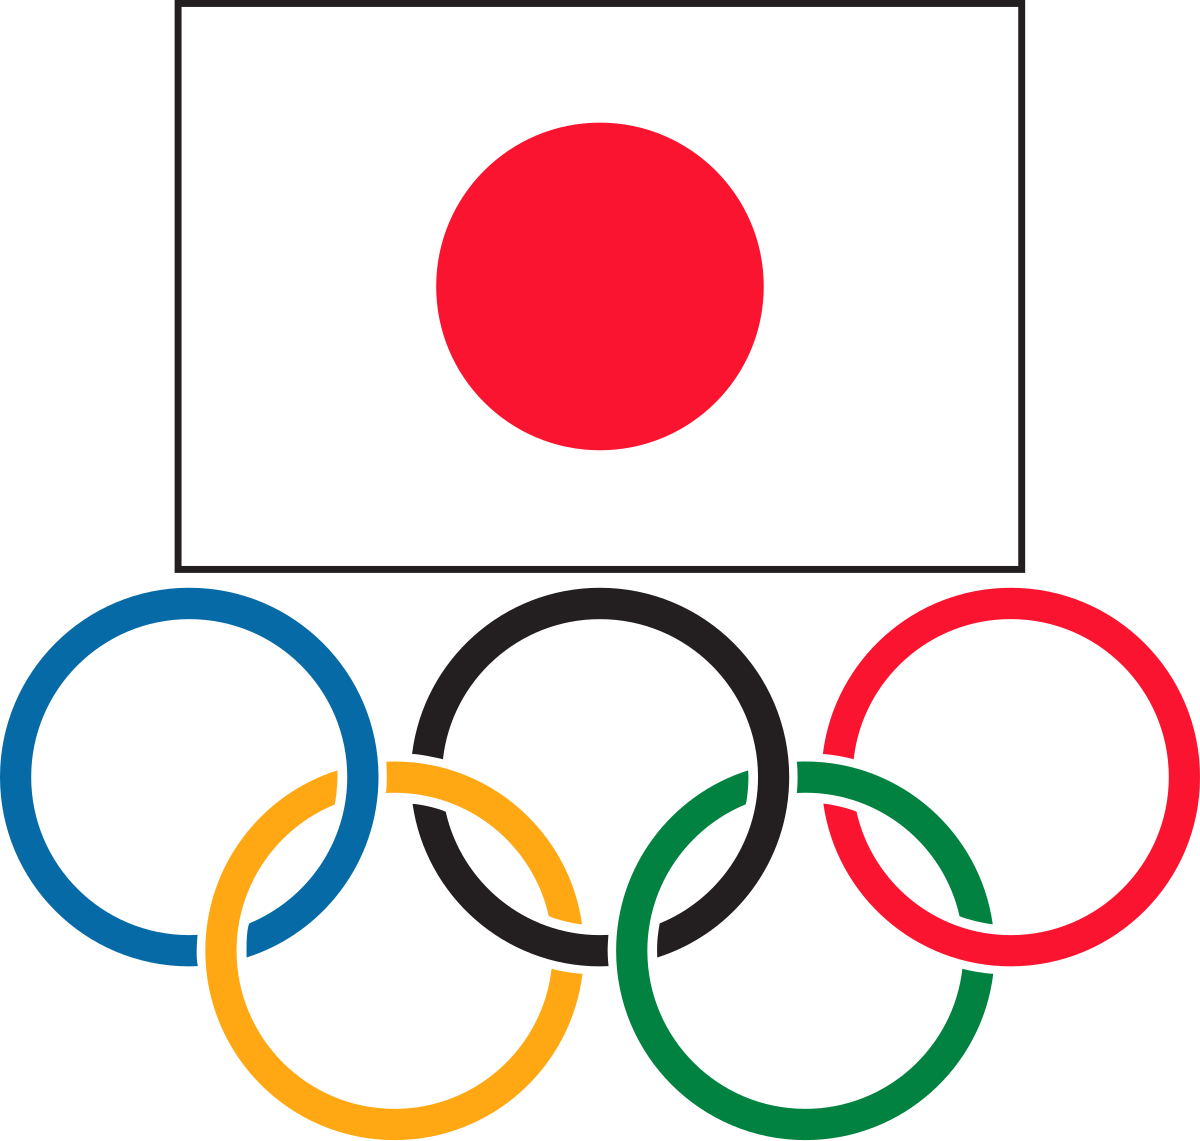 File:Japanese Olympic Committee logo.svg - Wikimedia Commons